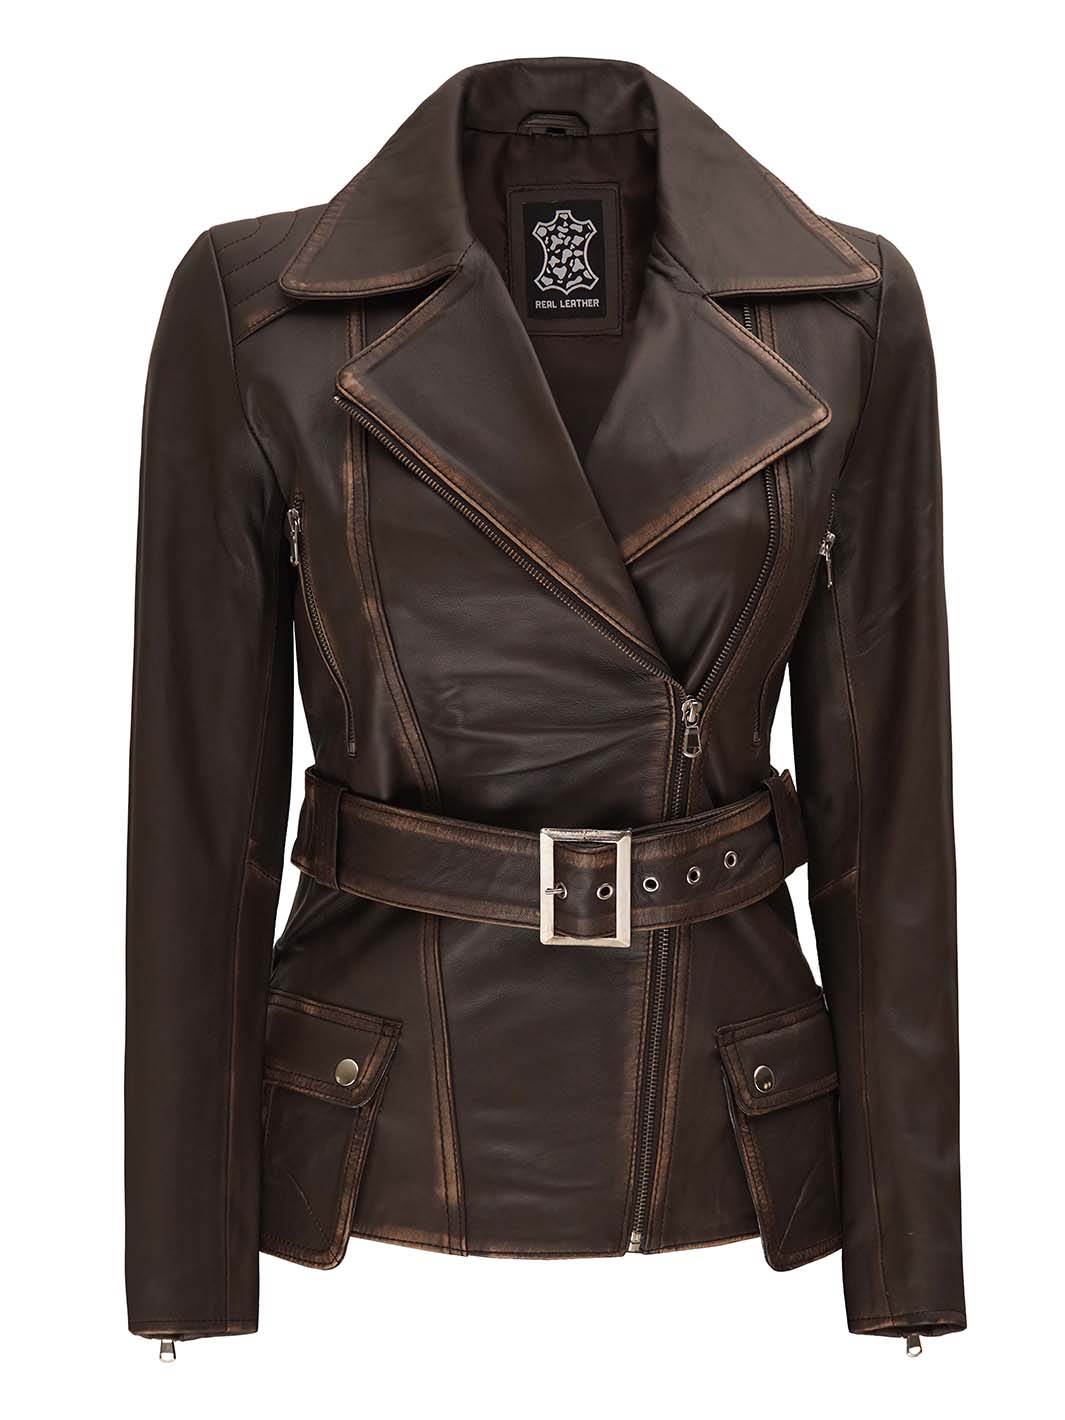 Distressed brown leather jacket women